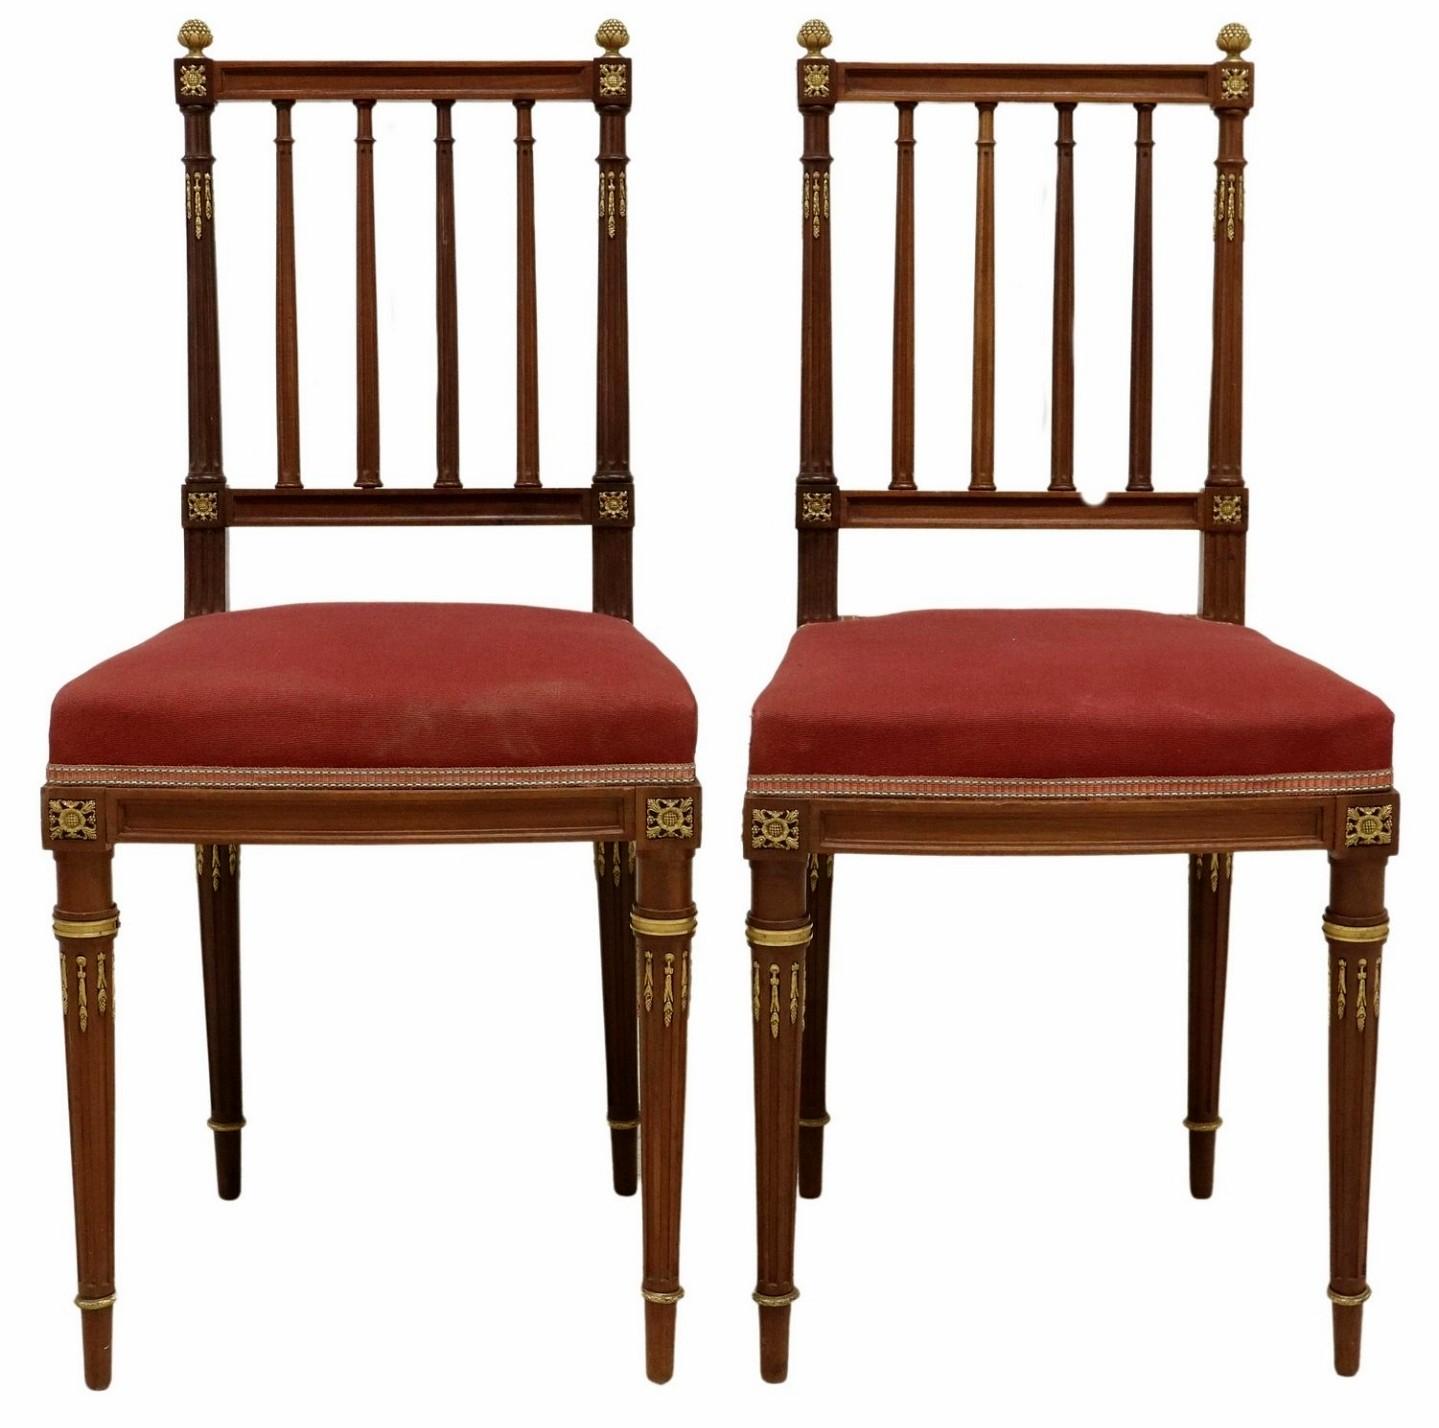 A pair of very fine quality antique French Louis XVI style gilt bronze ormolu mounted mahogany side chairs, attributed to luxury Parisian furniture maker Maison Krieger (1826-1910)

Exquisitely hand-crafted in Paris, France, in the late 19th